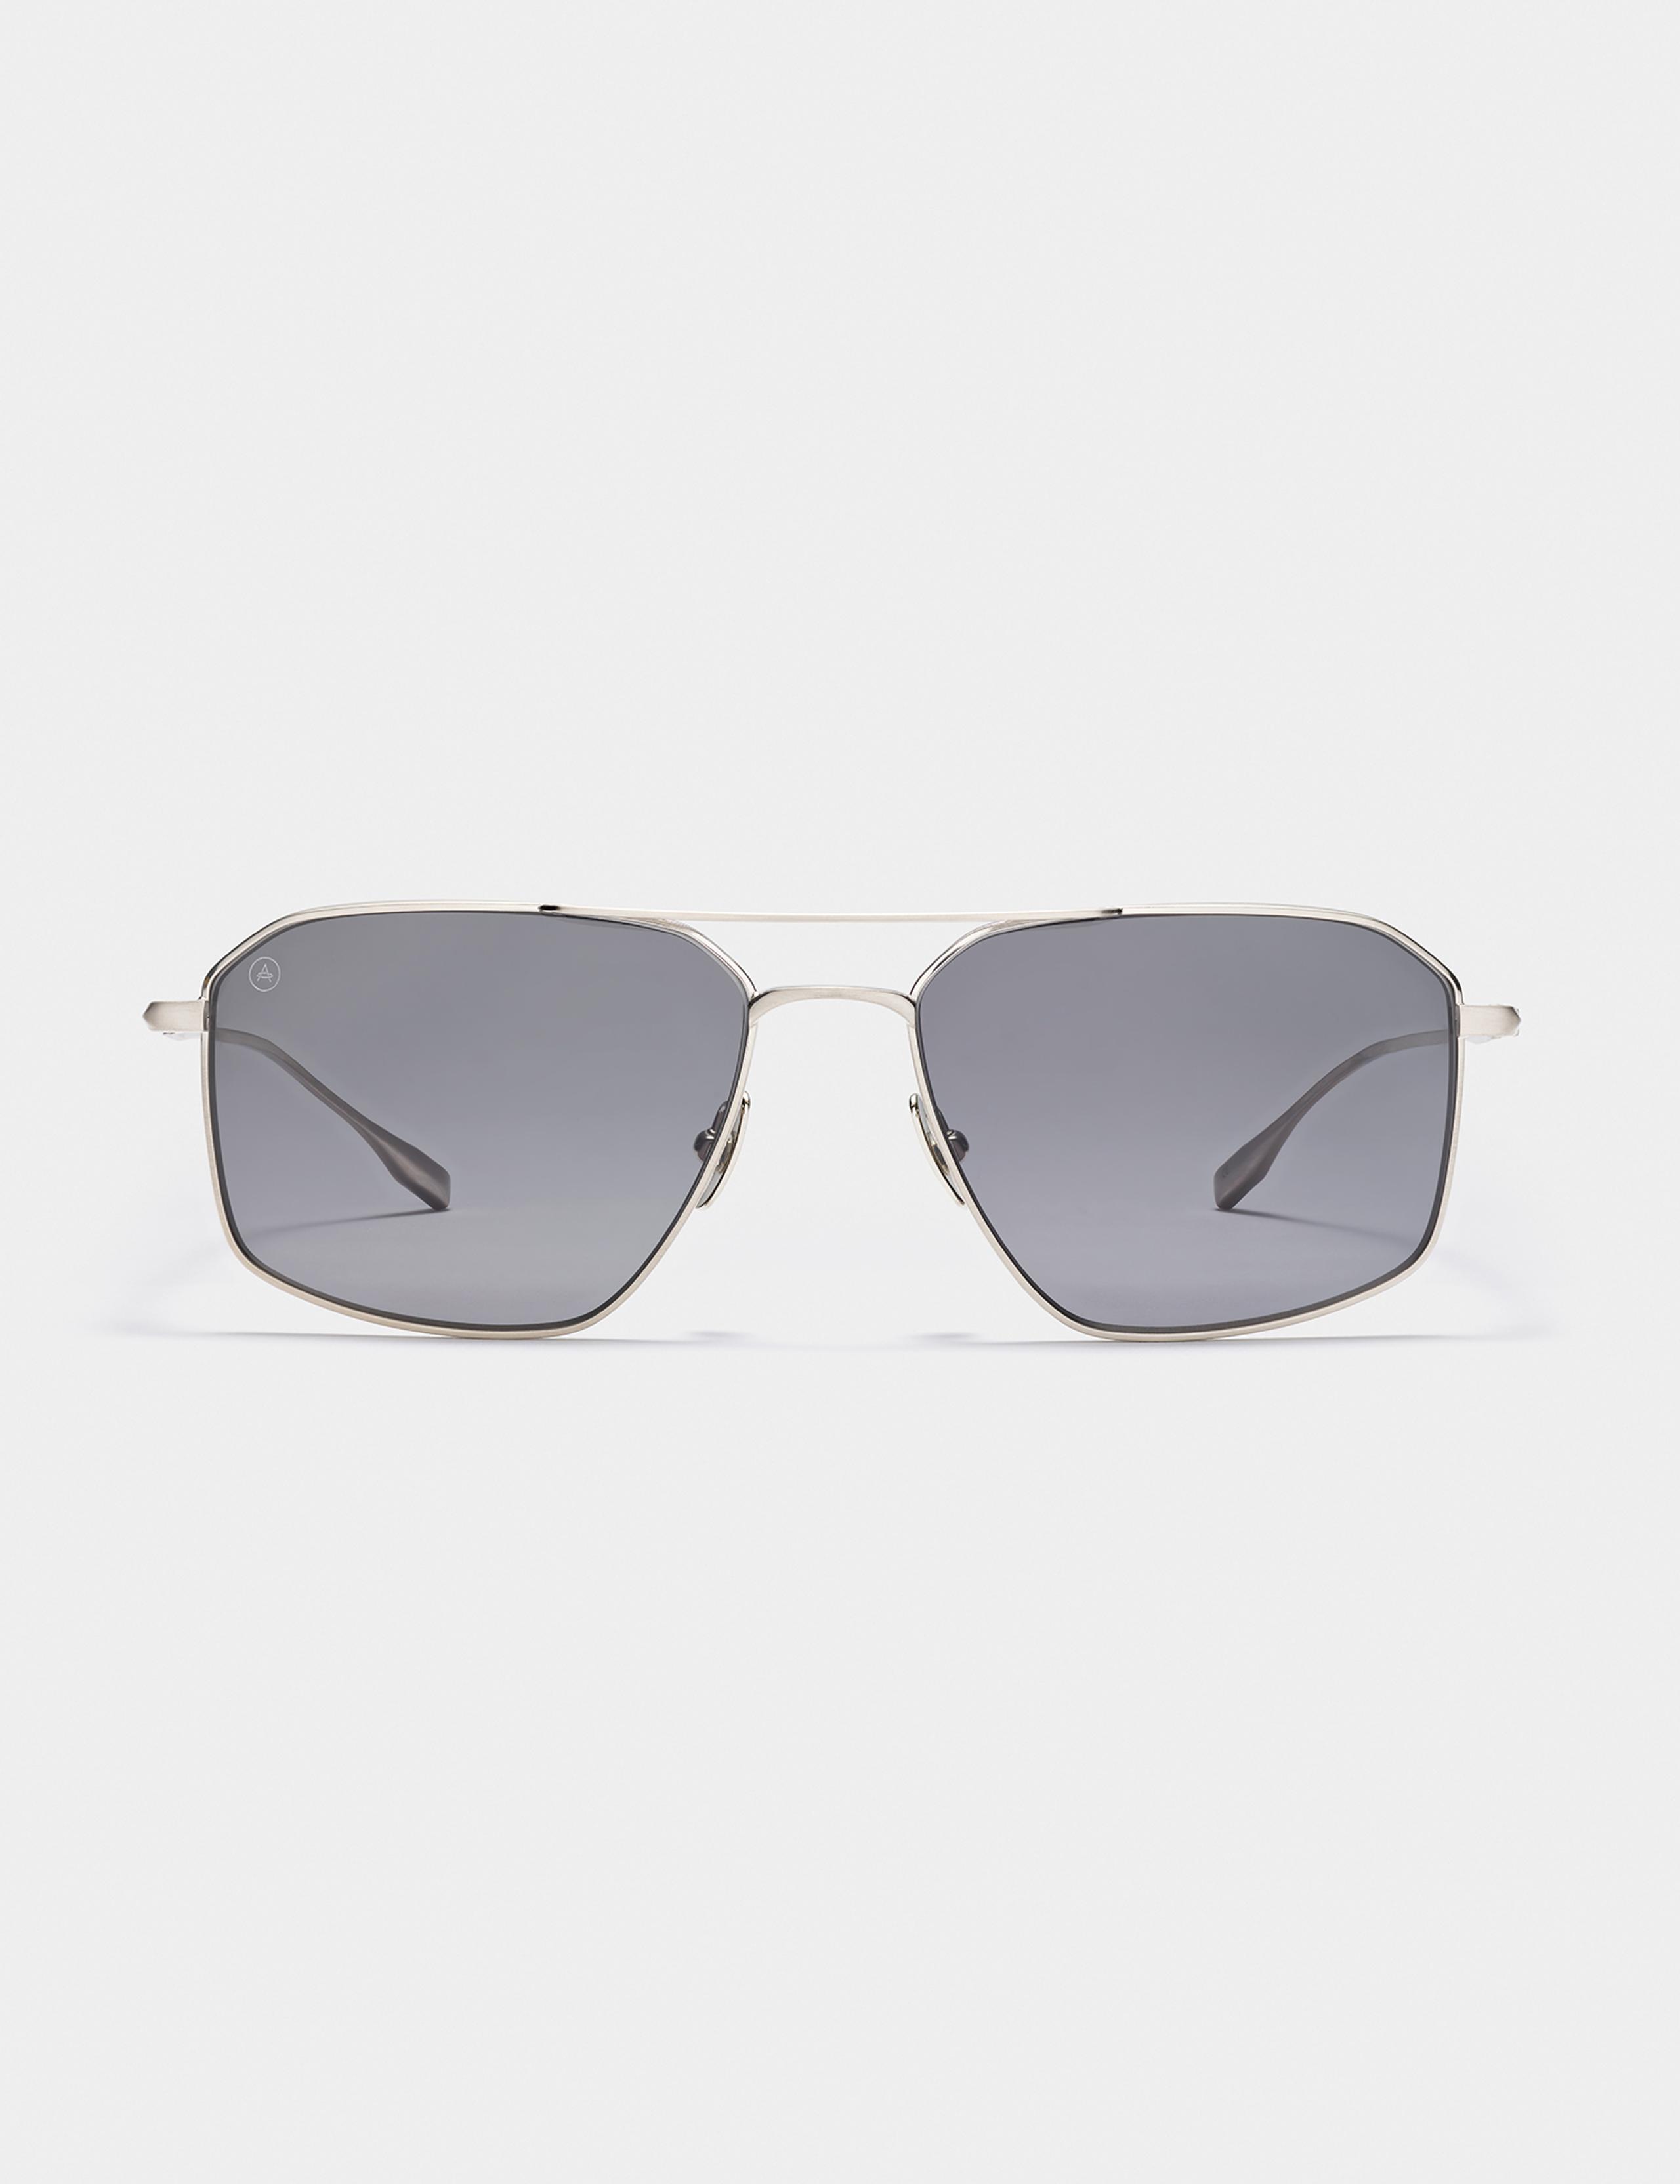 Studio Front View of Arches Sunglass